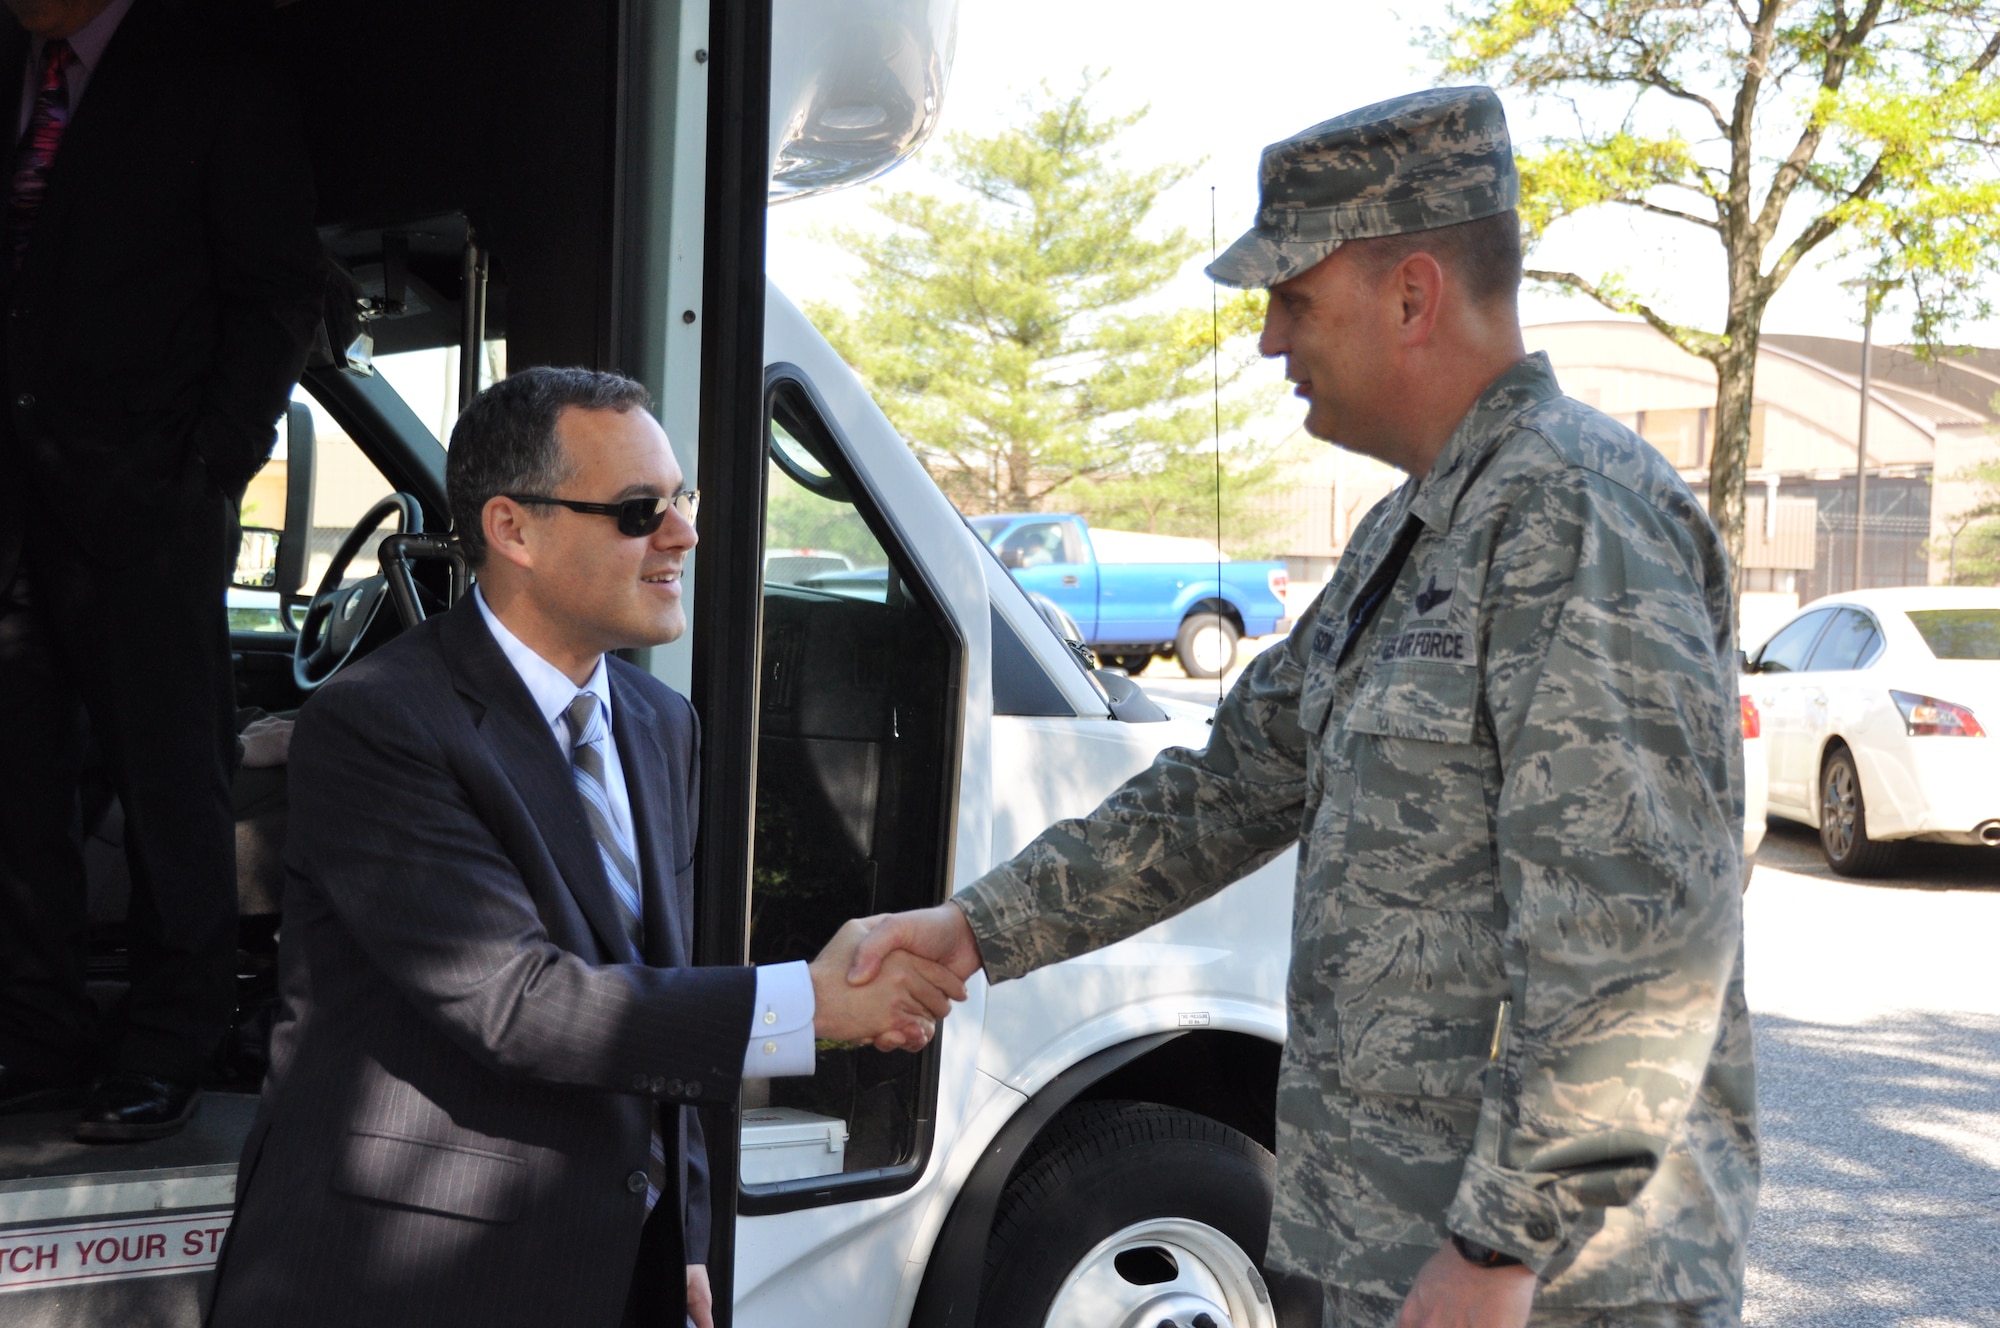 Mr. Daniel Ginsberg, Assistant Secretary of the Air Force for Manpower and Reserve Affairs, Washington, D.C., shakes the hand of Air Force Col. William Mason, commander of the 459th Air Refueling Wing, during a visit to the wing at Joint Base Andrews, Md., May 17, 2013. Ginsberg visited the wing to interact with the Airmen and answer questions regarding manpower issues. (U.S. Air Force photo/ Staff Sgt. Katie Spencer)